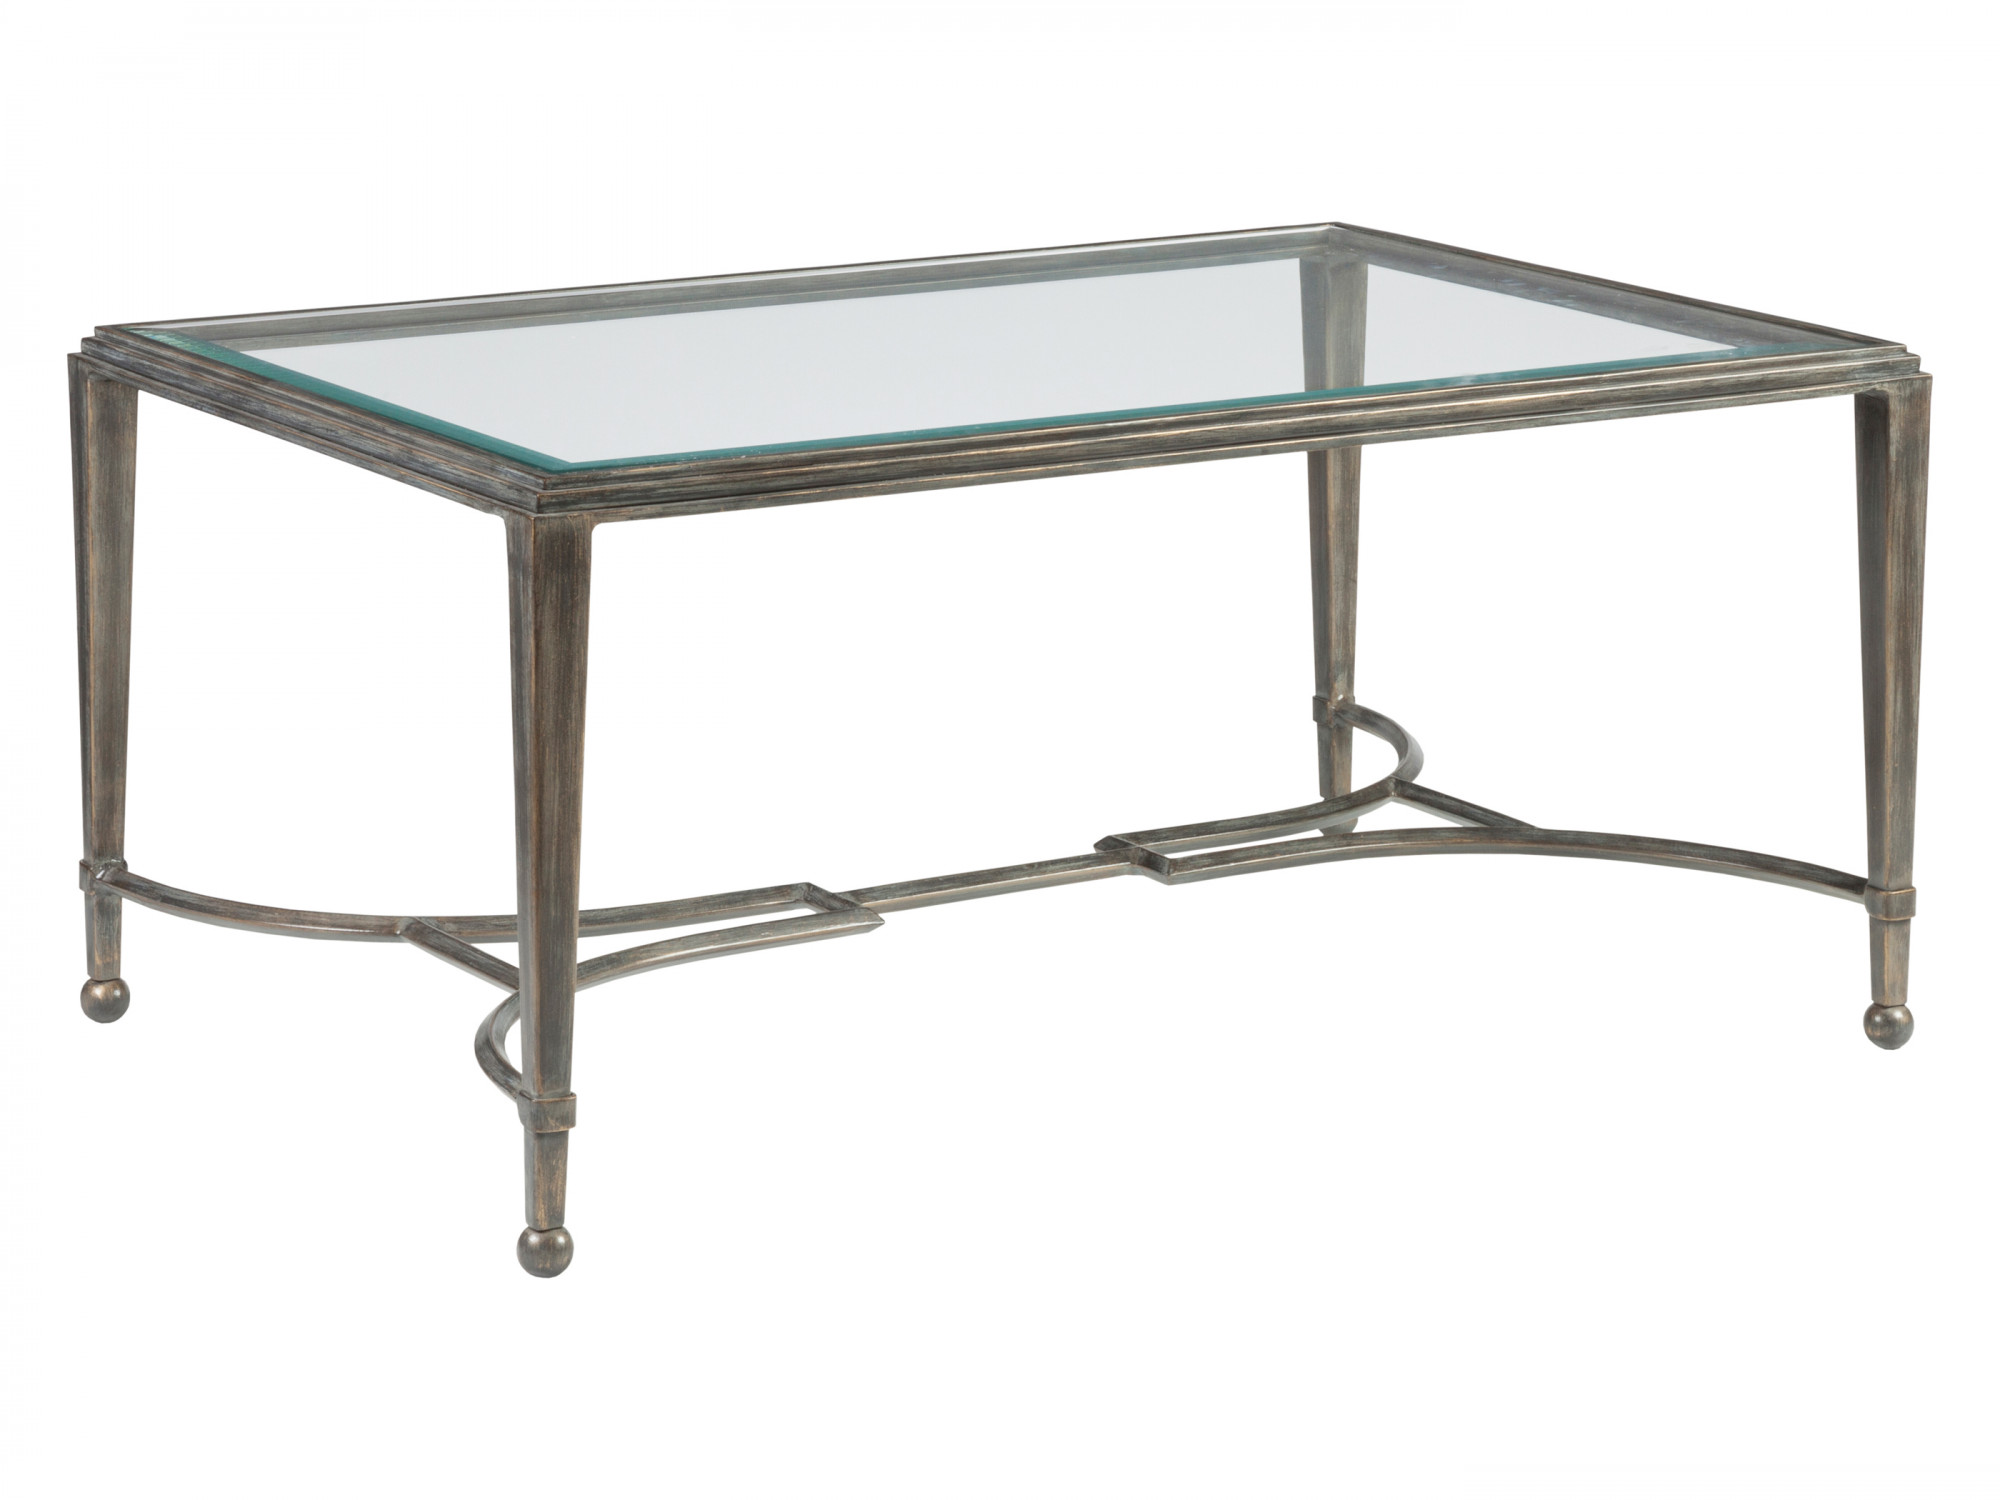 Artistica Home Sangiovese Argento Small Rectangular Cocktail Table